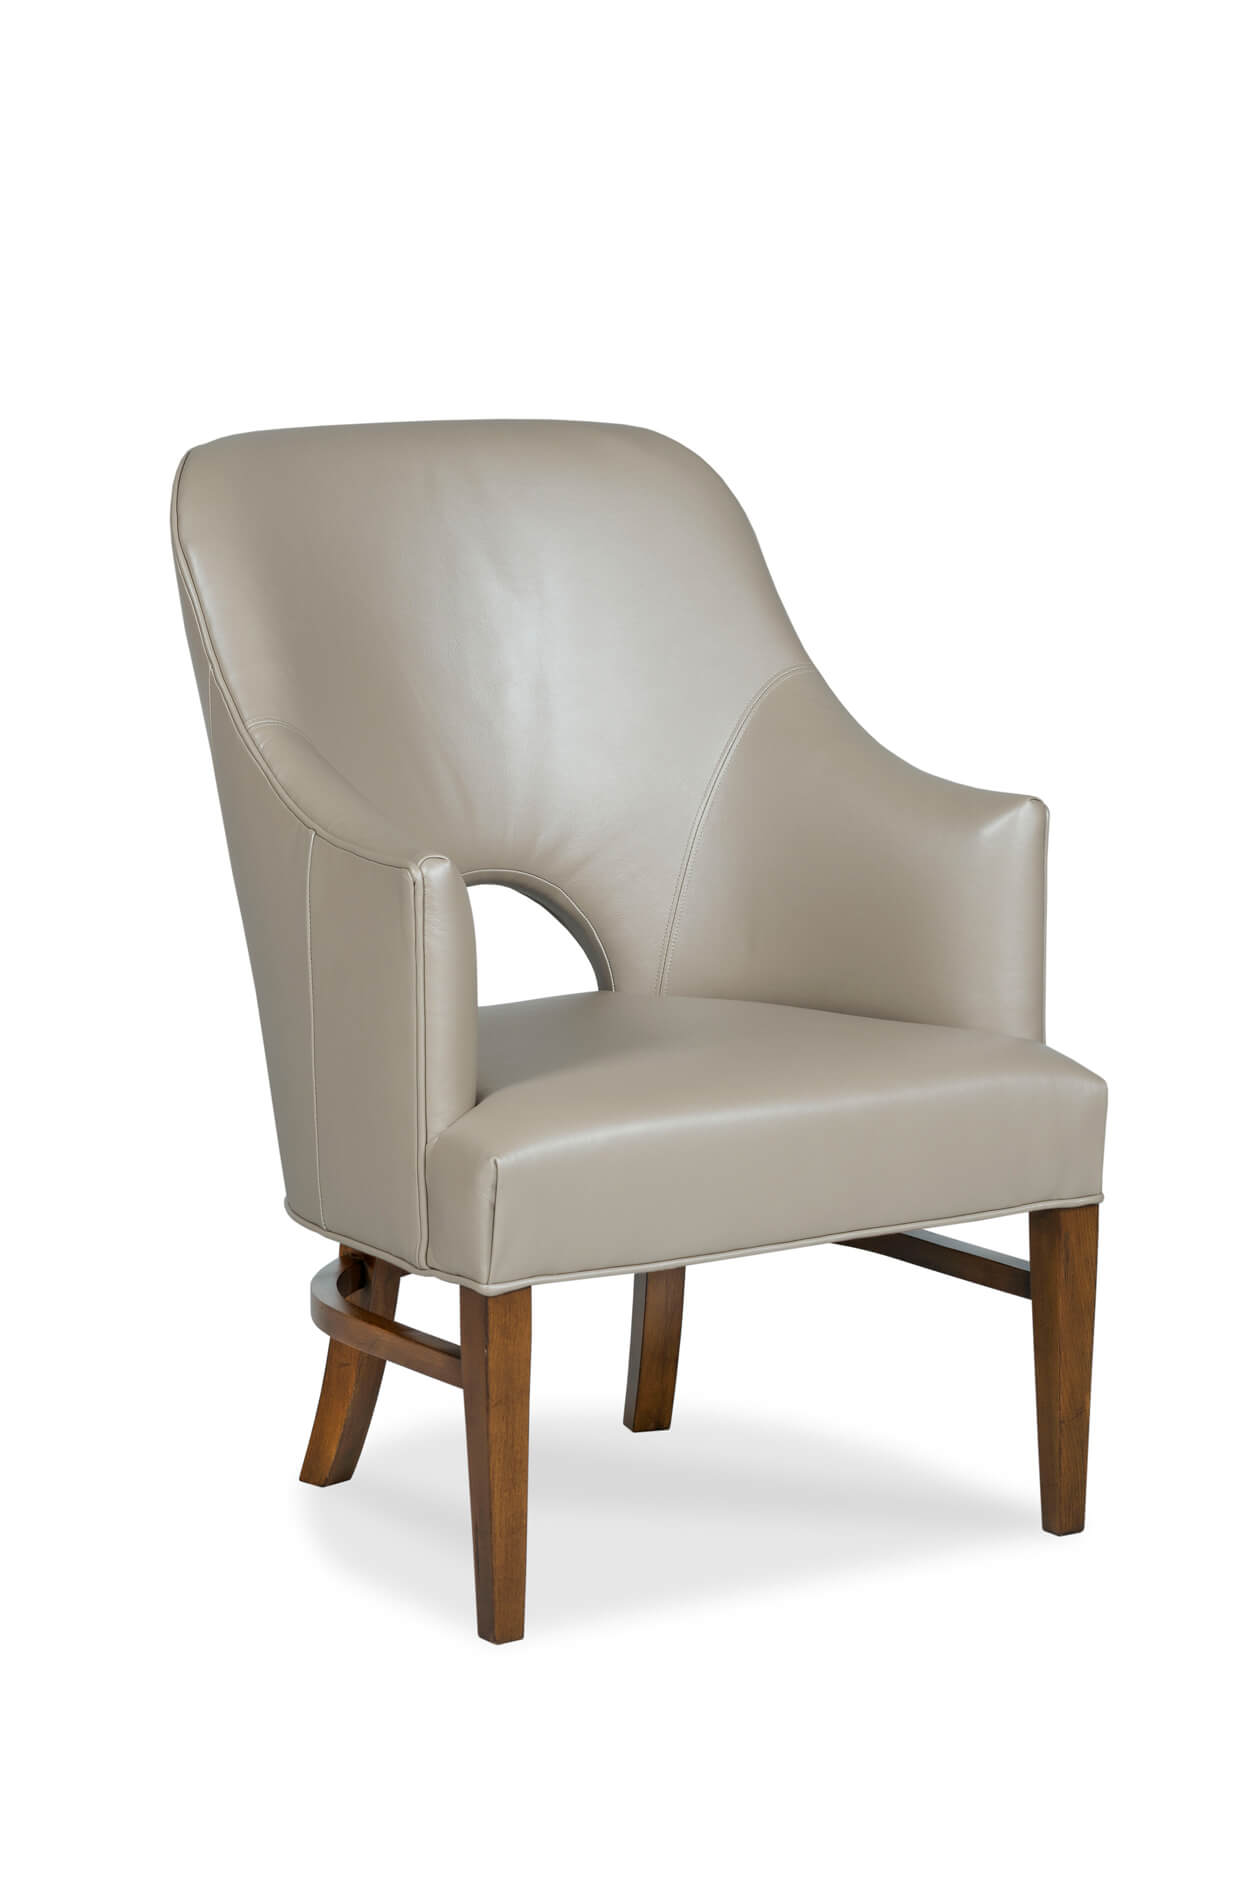 Fairfield's Vanessa Upholstered Dining Arm Chair